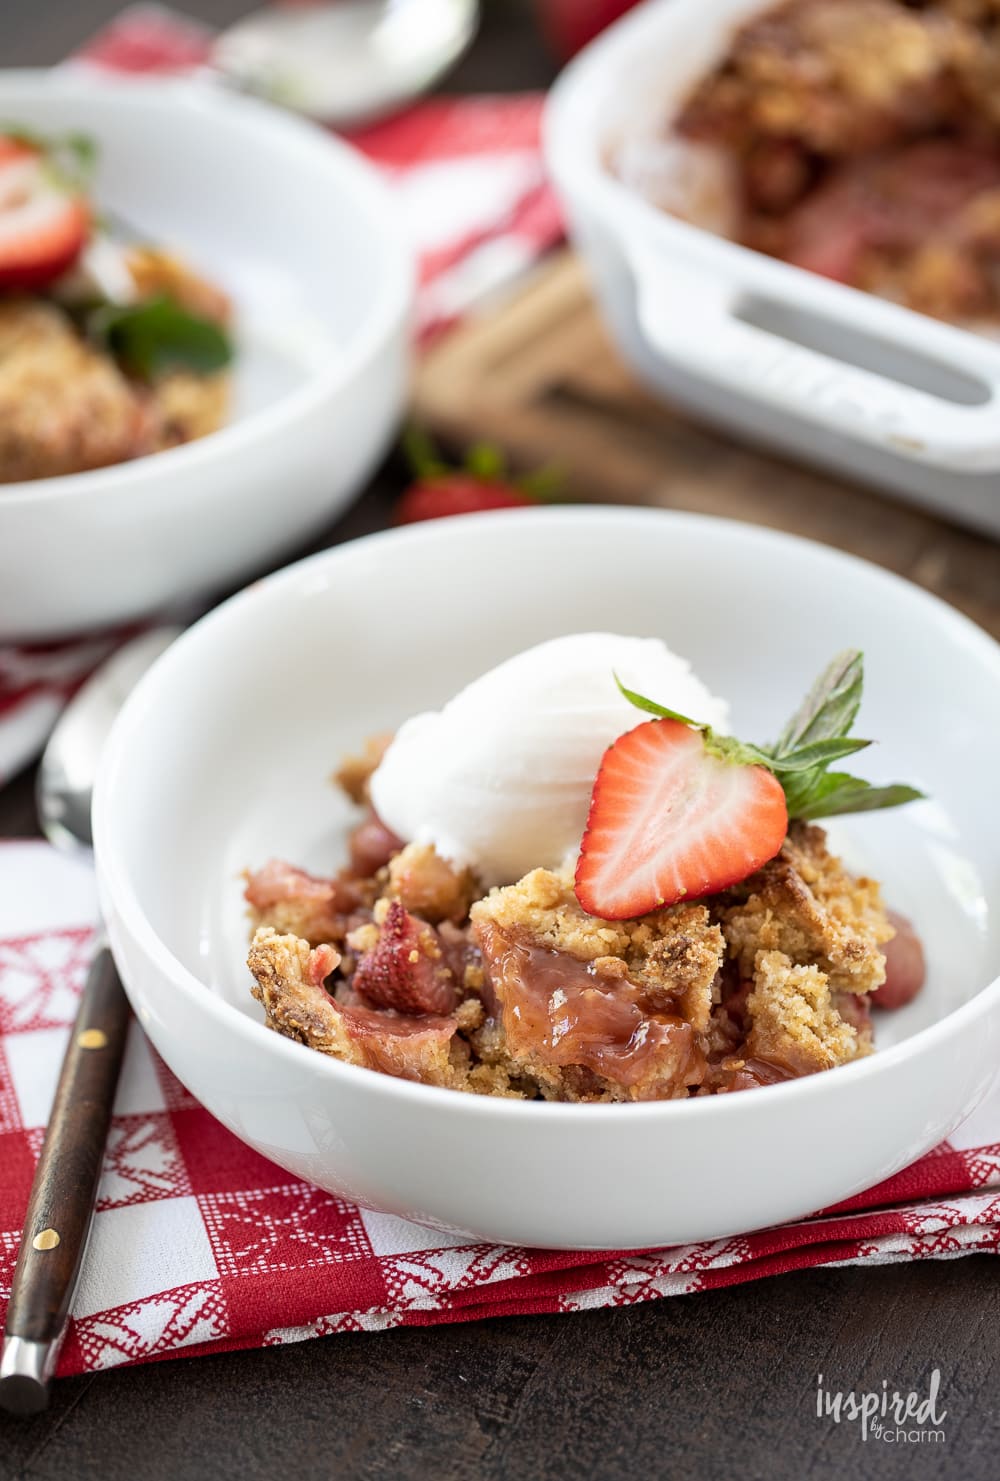 strawberry crumble served in two bowls with a scoop of ice cream.